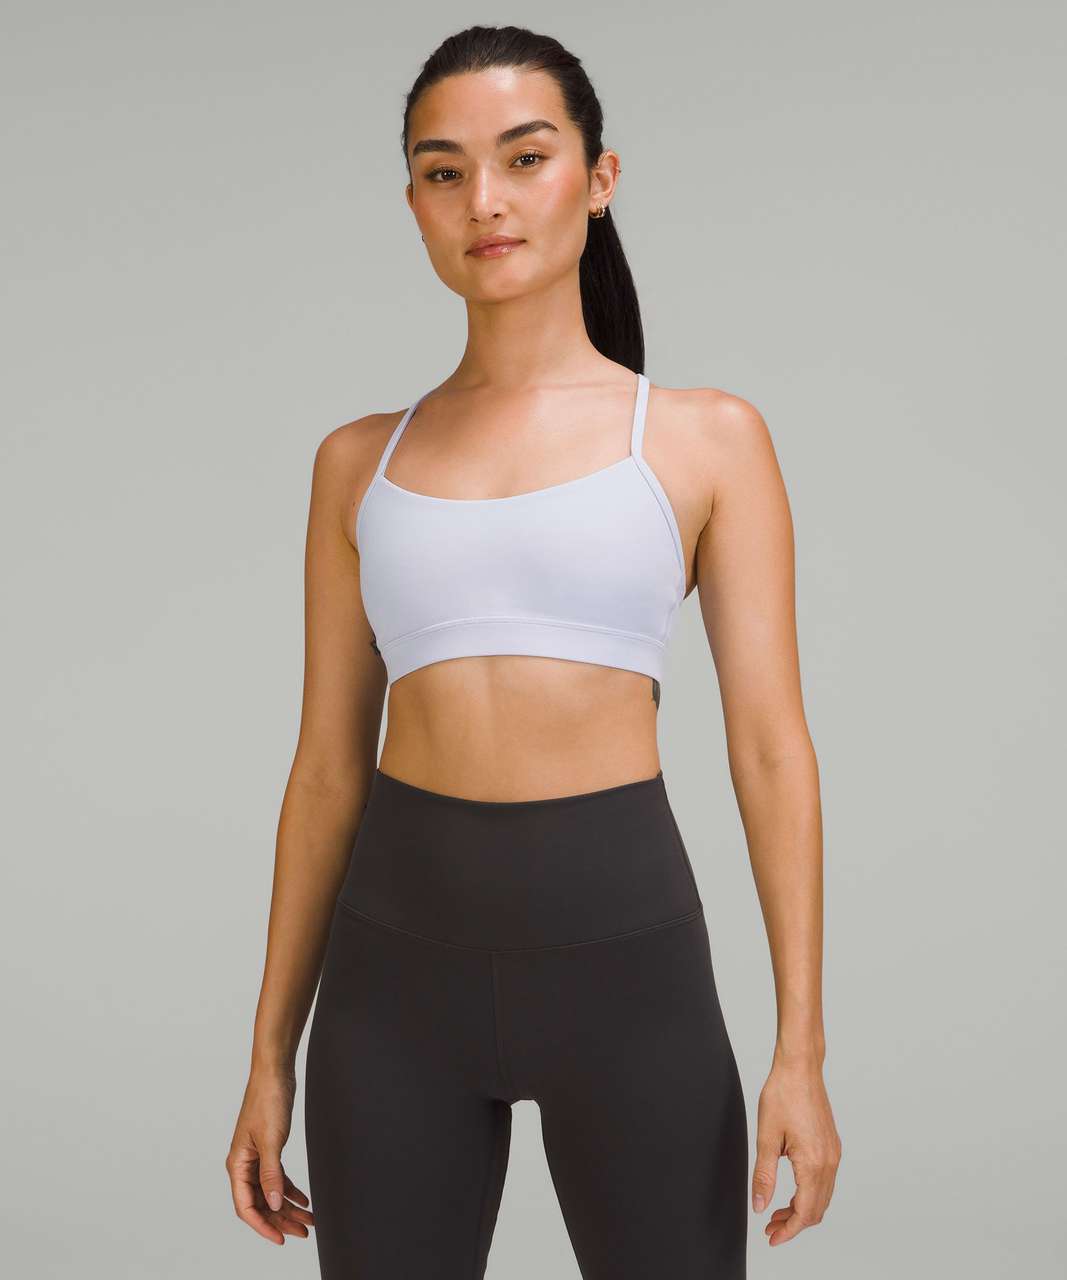 Lululemon Flow Y White Gray Sports Bra Size 8 Mesh back With